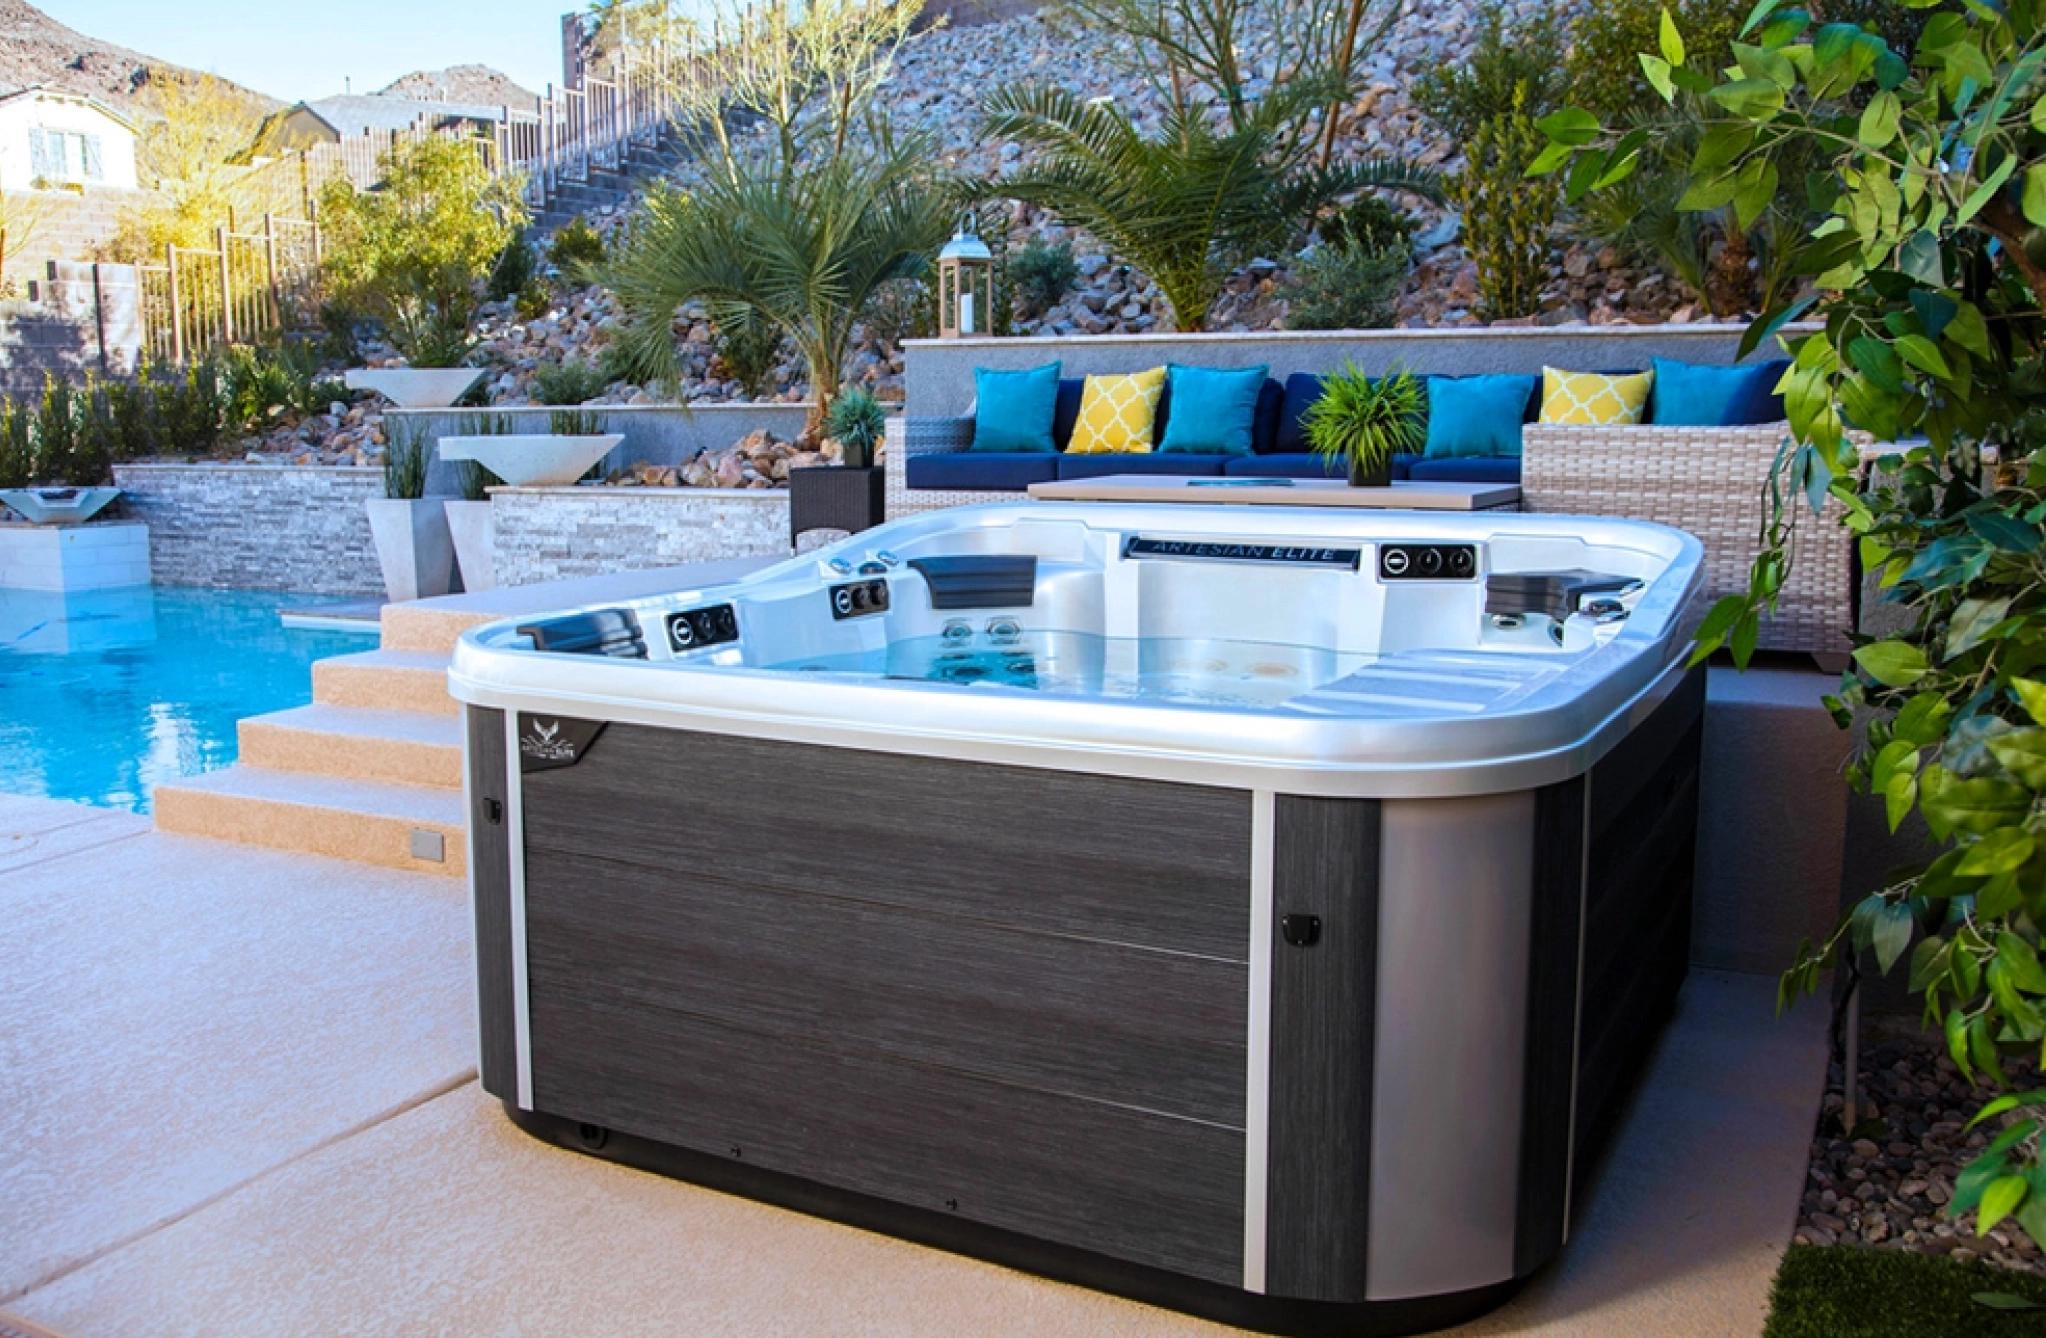 What are the health benefits of hot tubs?